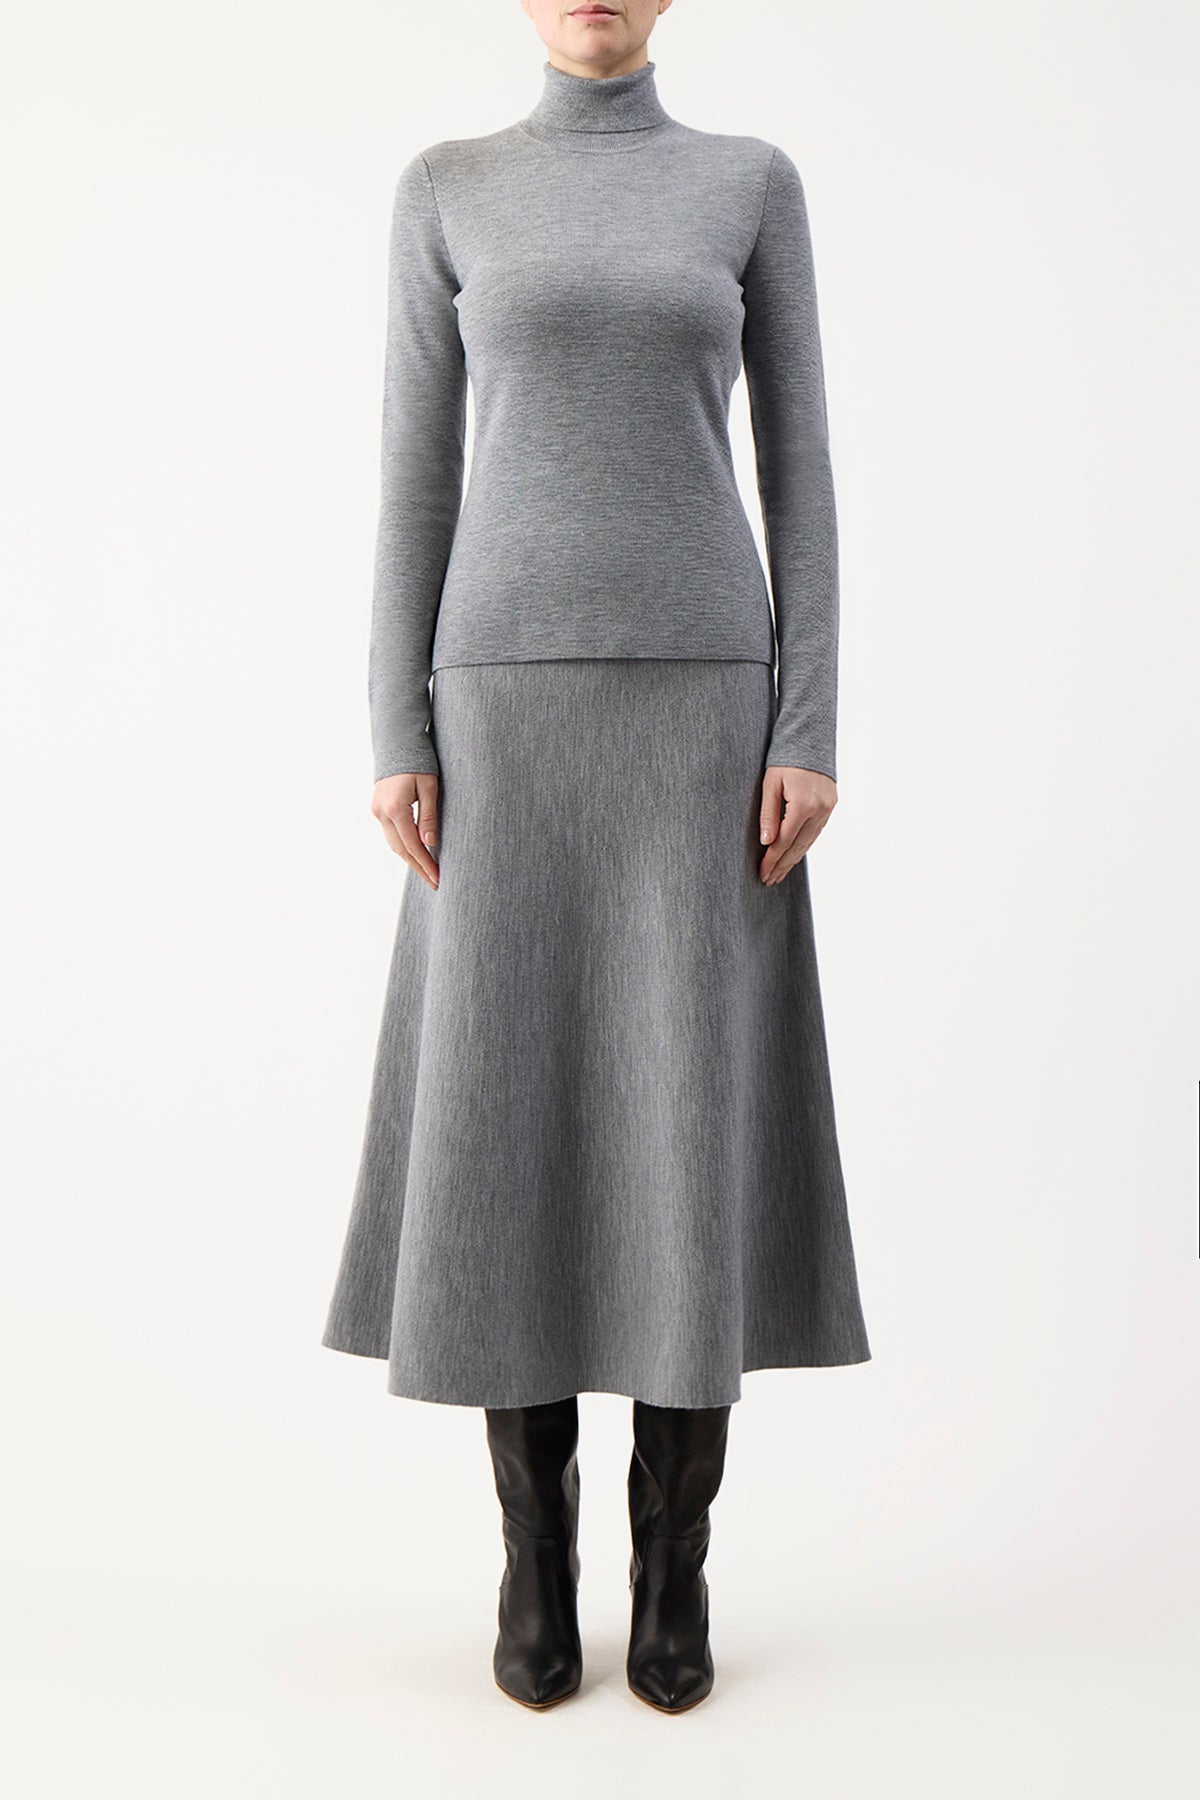 May Knit Turtleneck in Heather Grey Cashmere Wool